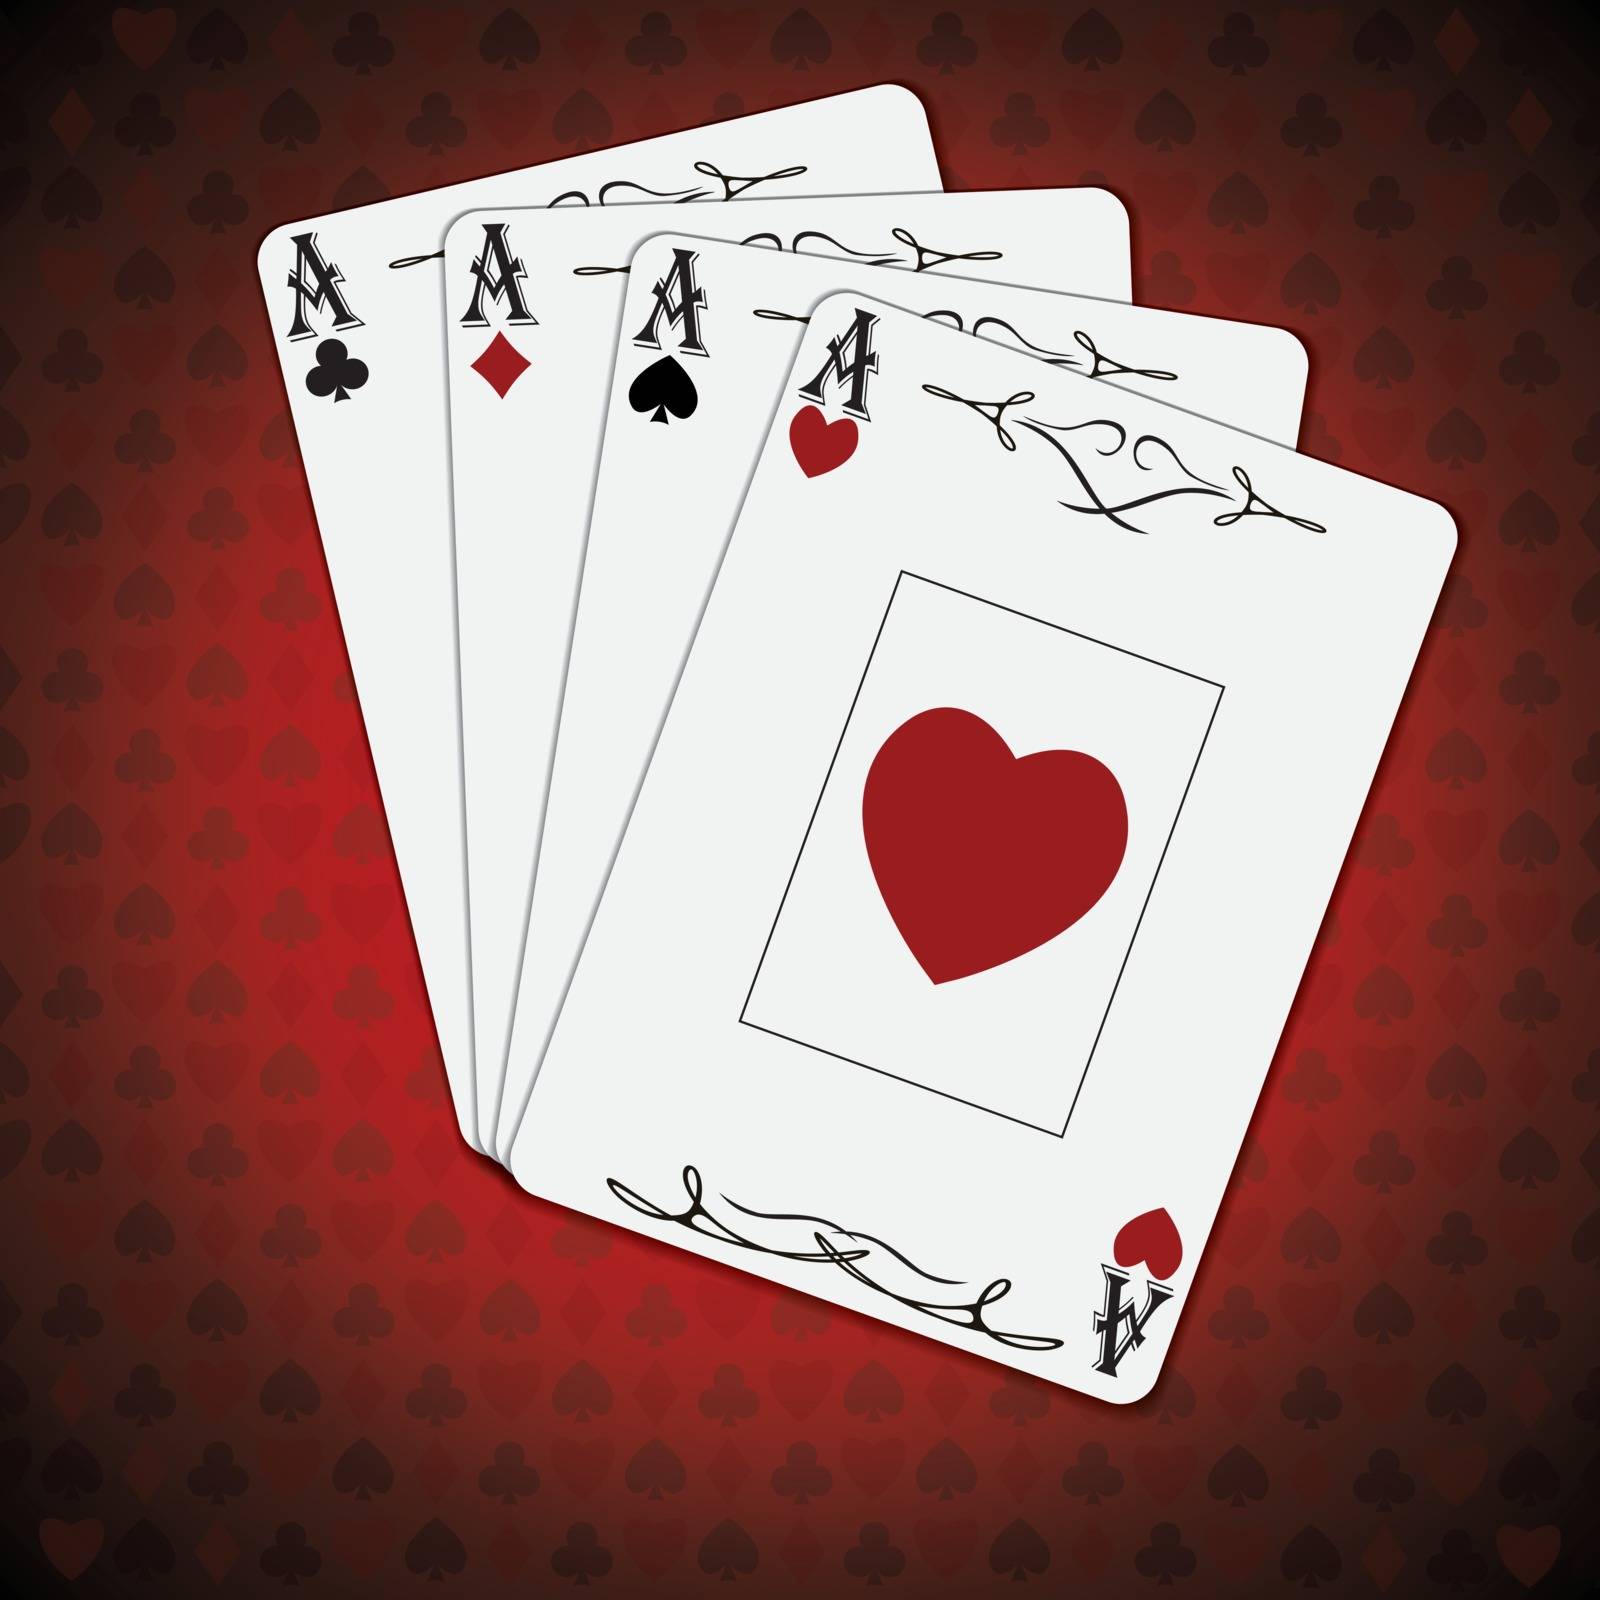 Ace of spades, ace of hearts, ace of diamonds, ace of clubs poker cards red white background by Lemon_workshop